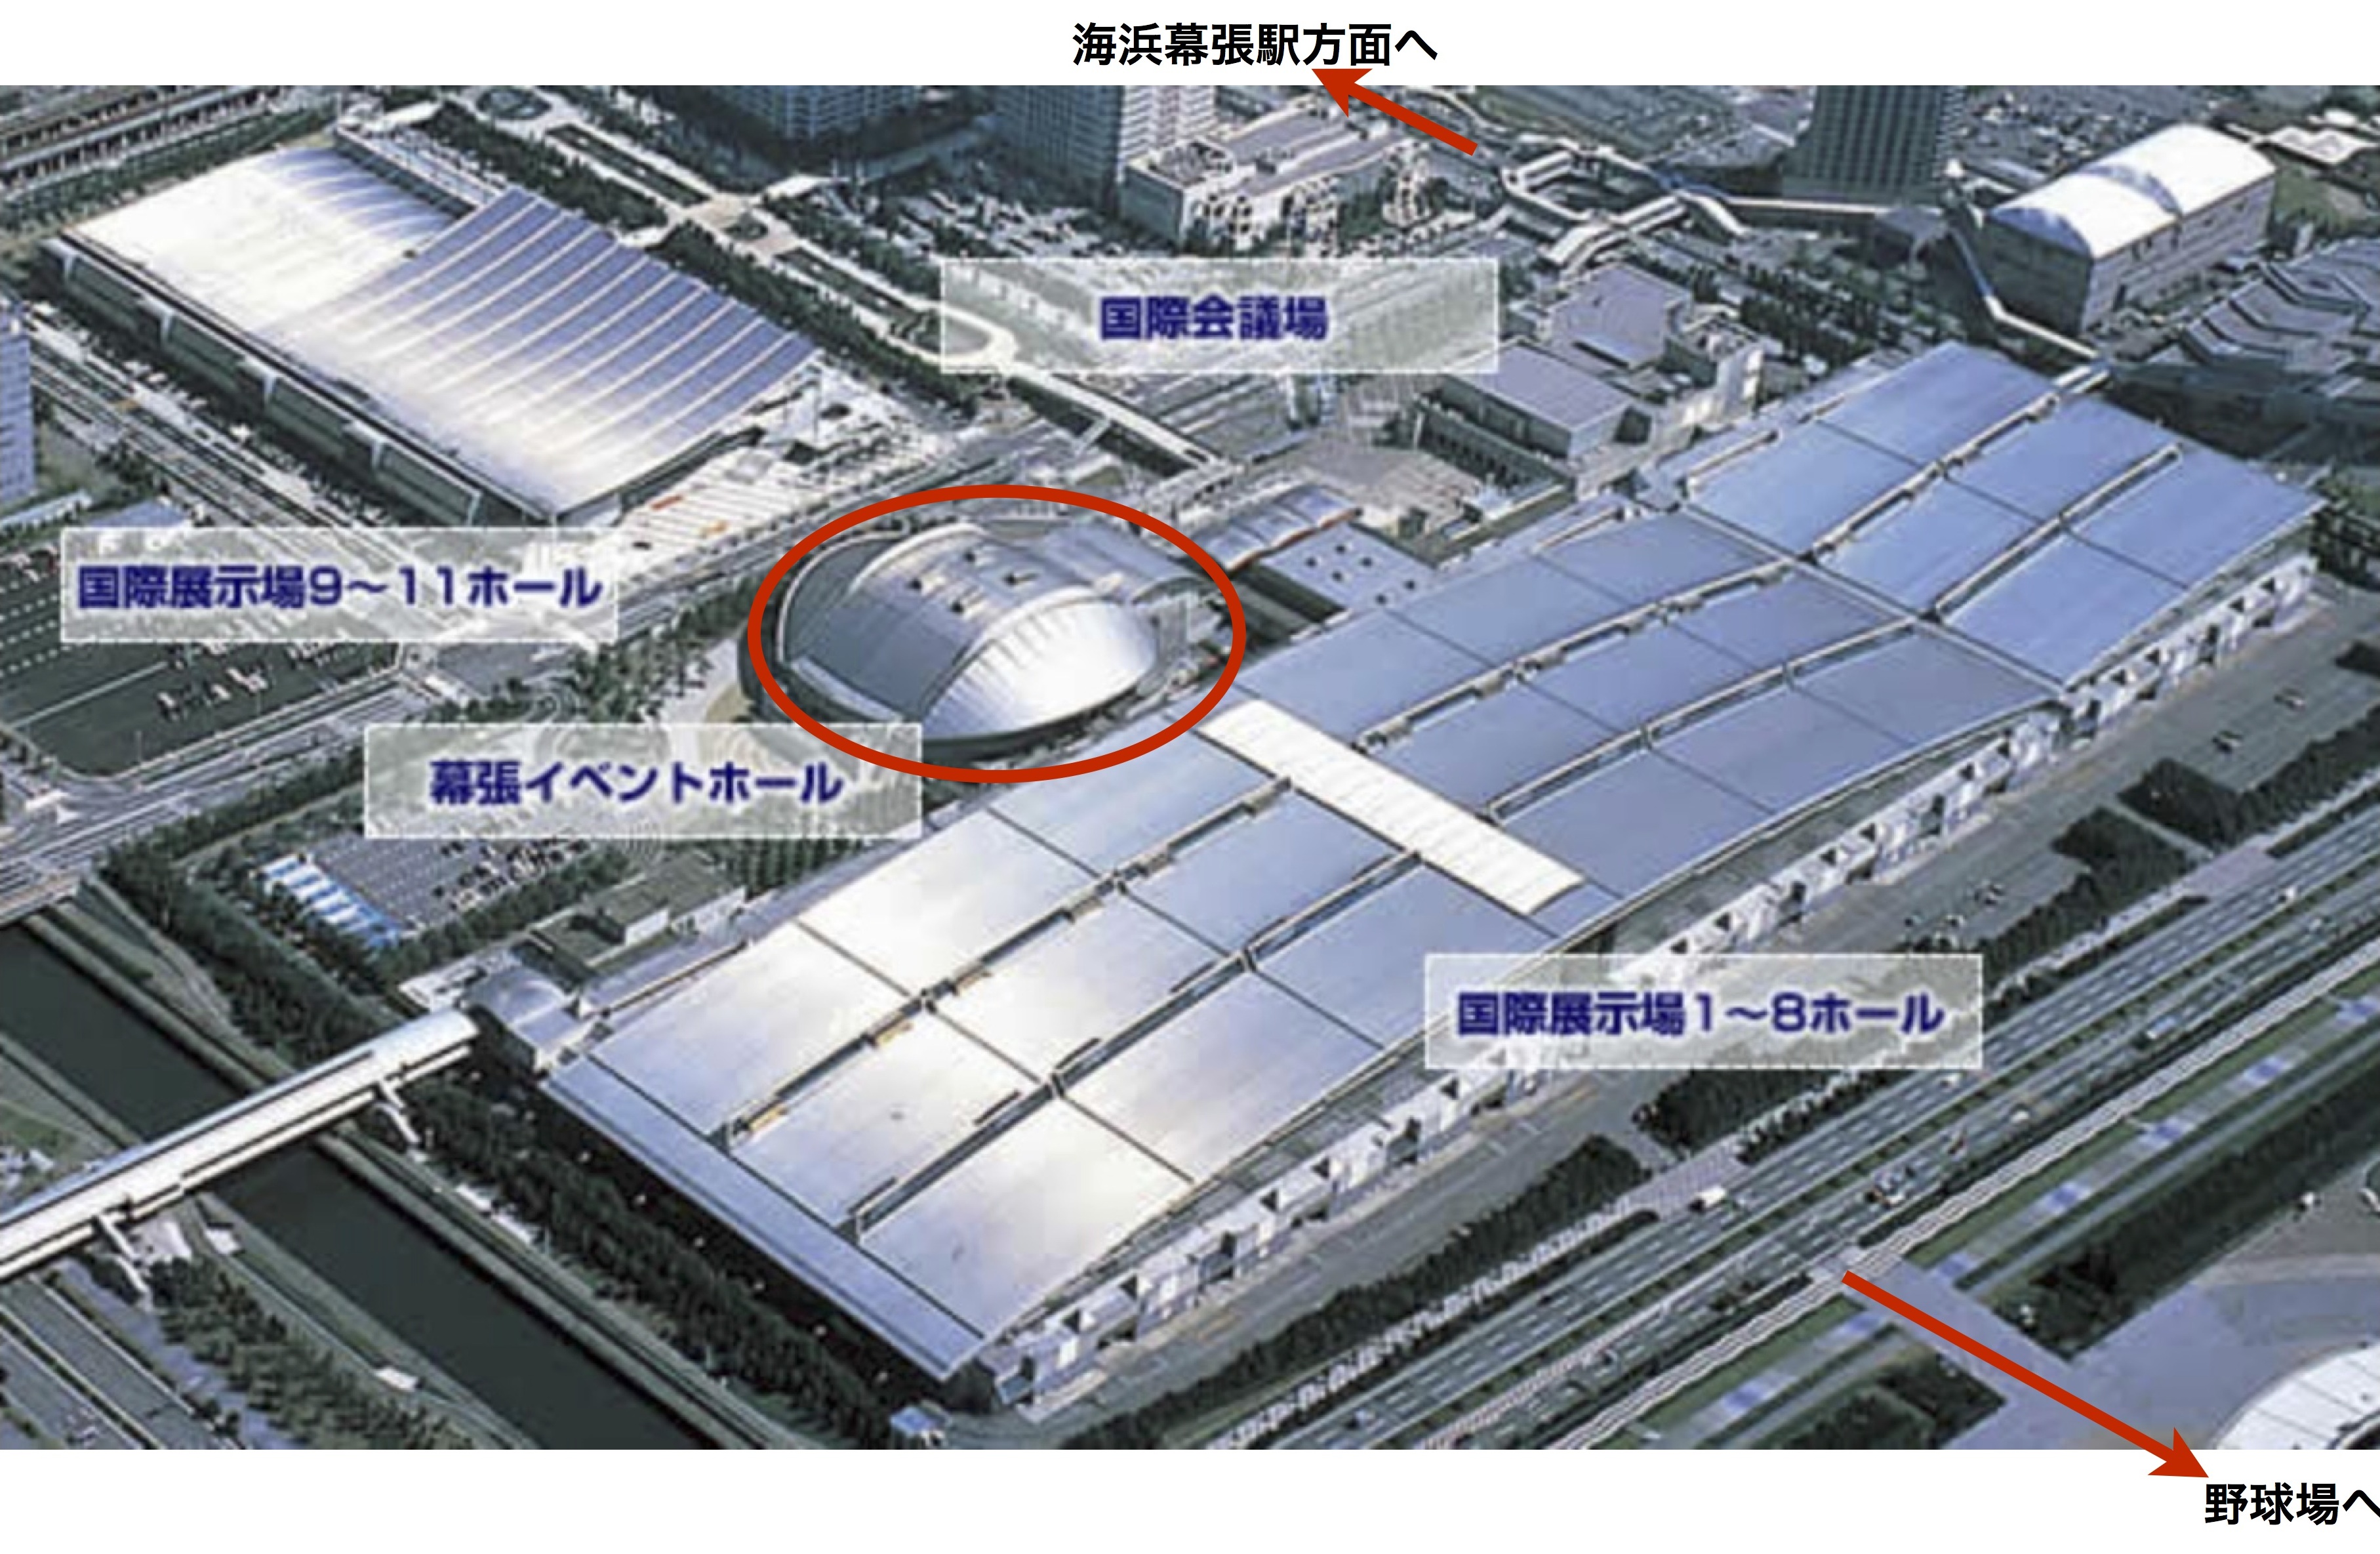 one of the most well-known convention facilities in Japan.